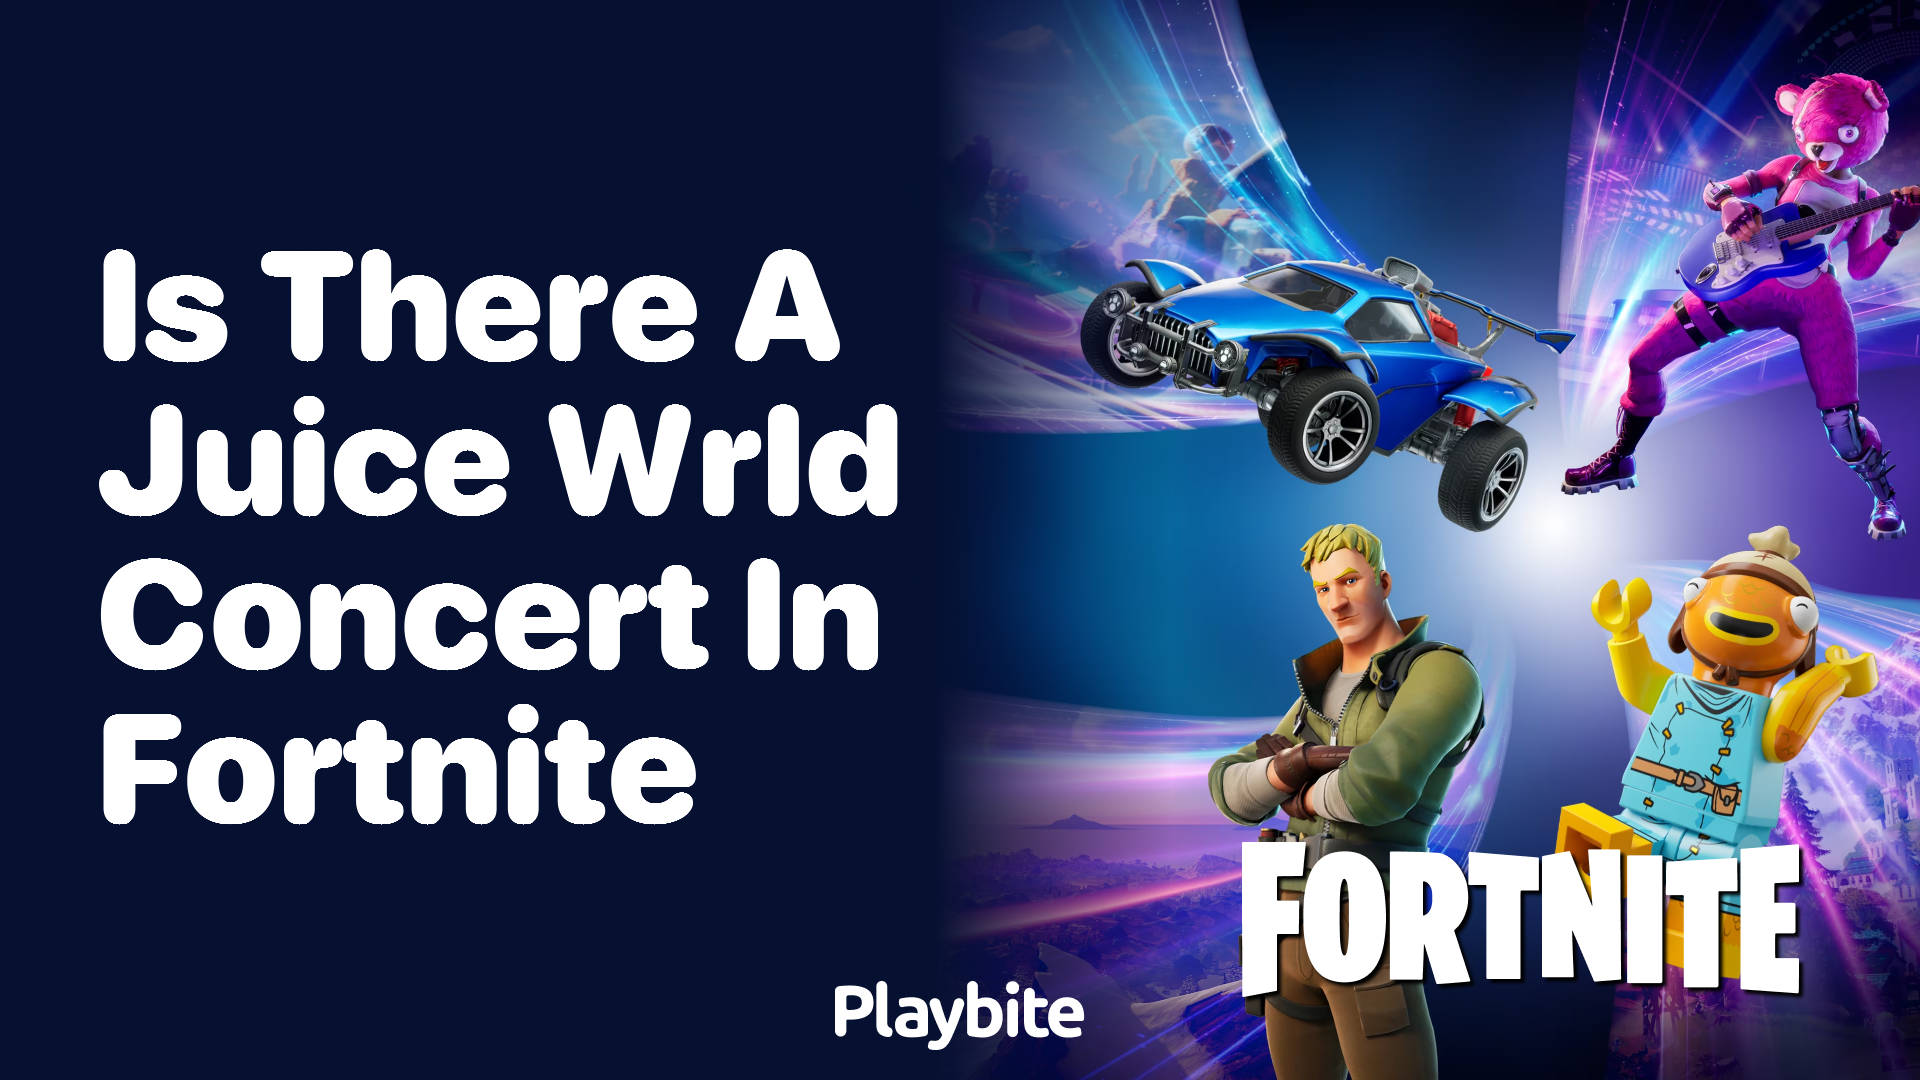 Is There a Juice WRLD Concert in Fortnite?